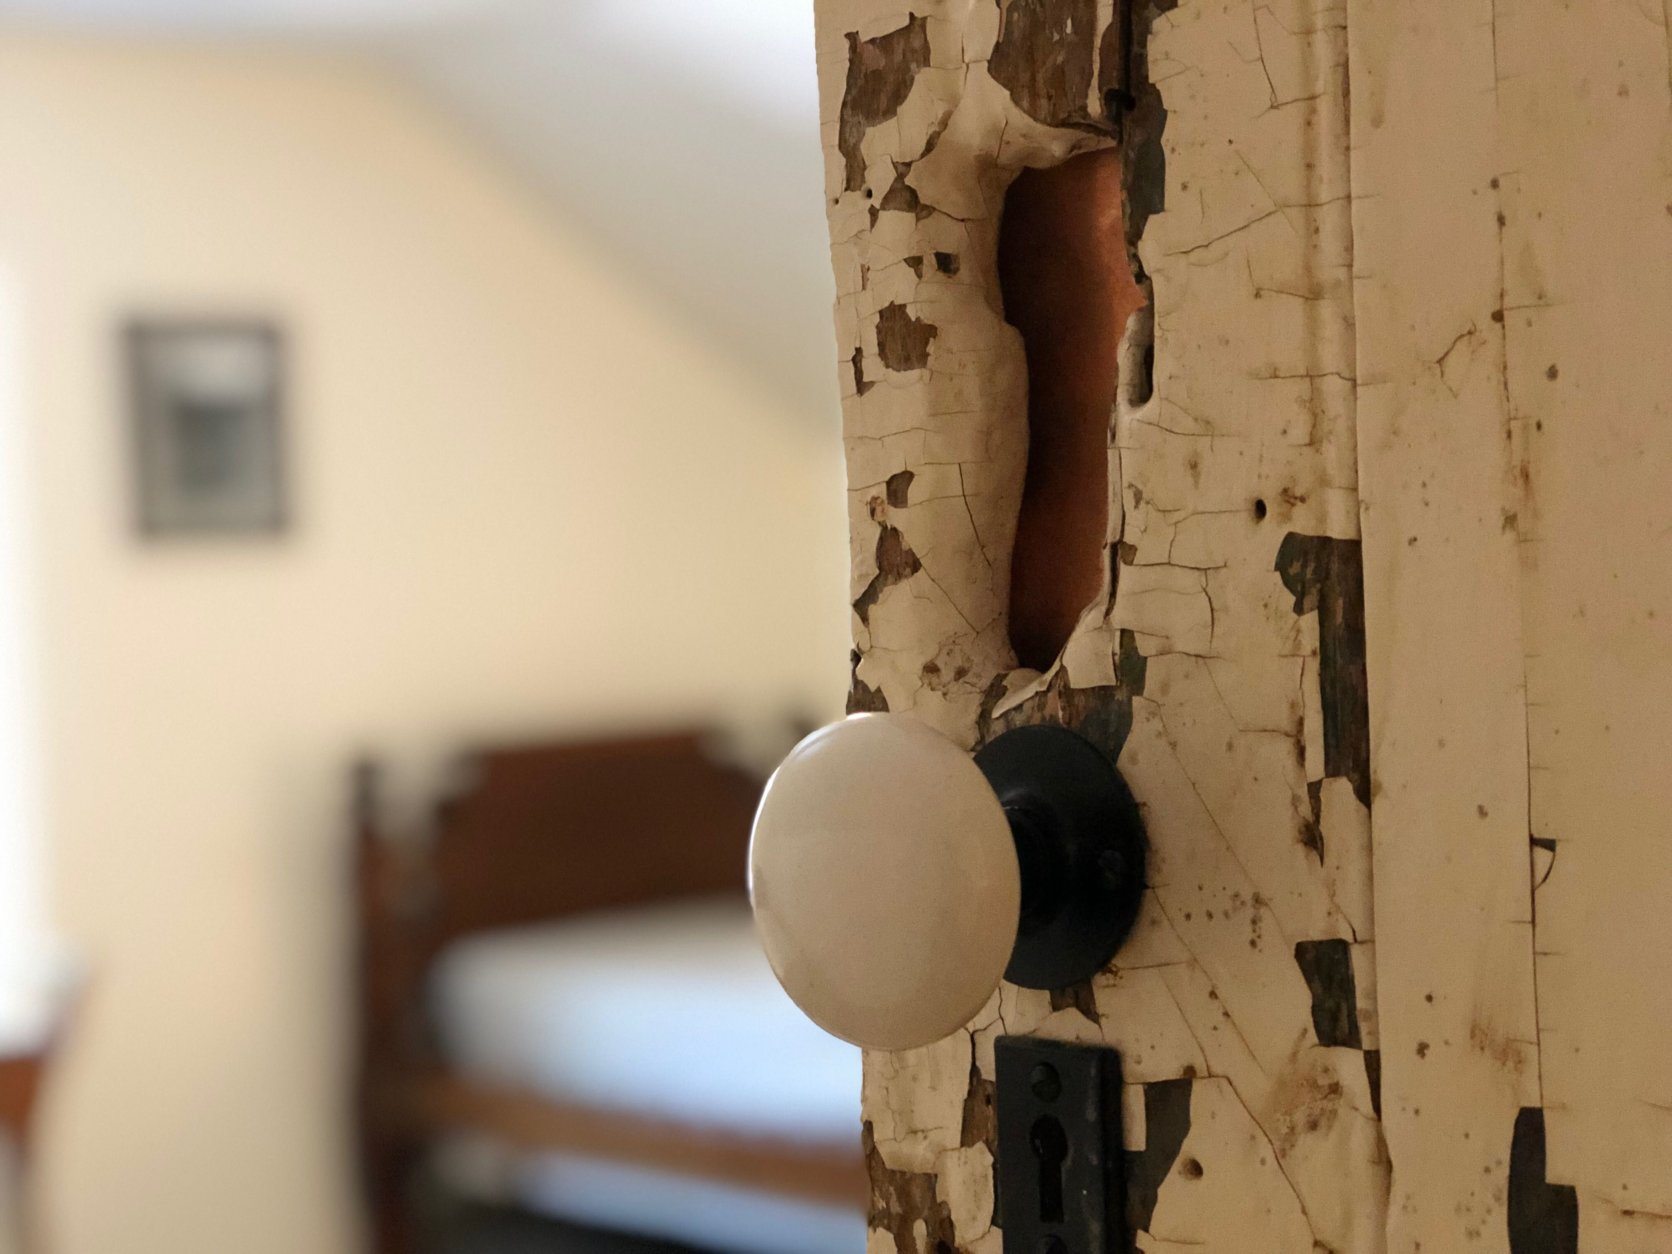 Bert Swain was able to tell the renovators that this door was original to the home. The ”handle” carved out above the doorknob was a detail he remembered. (WTOP/Kate Ryan)